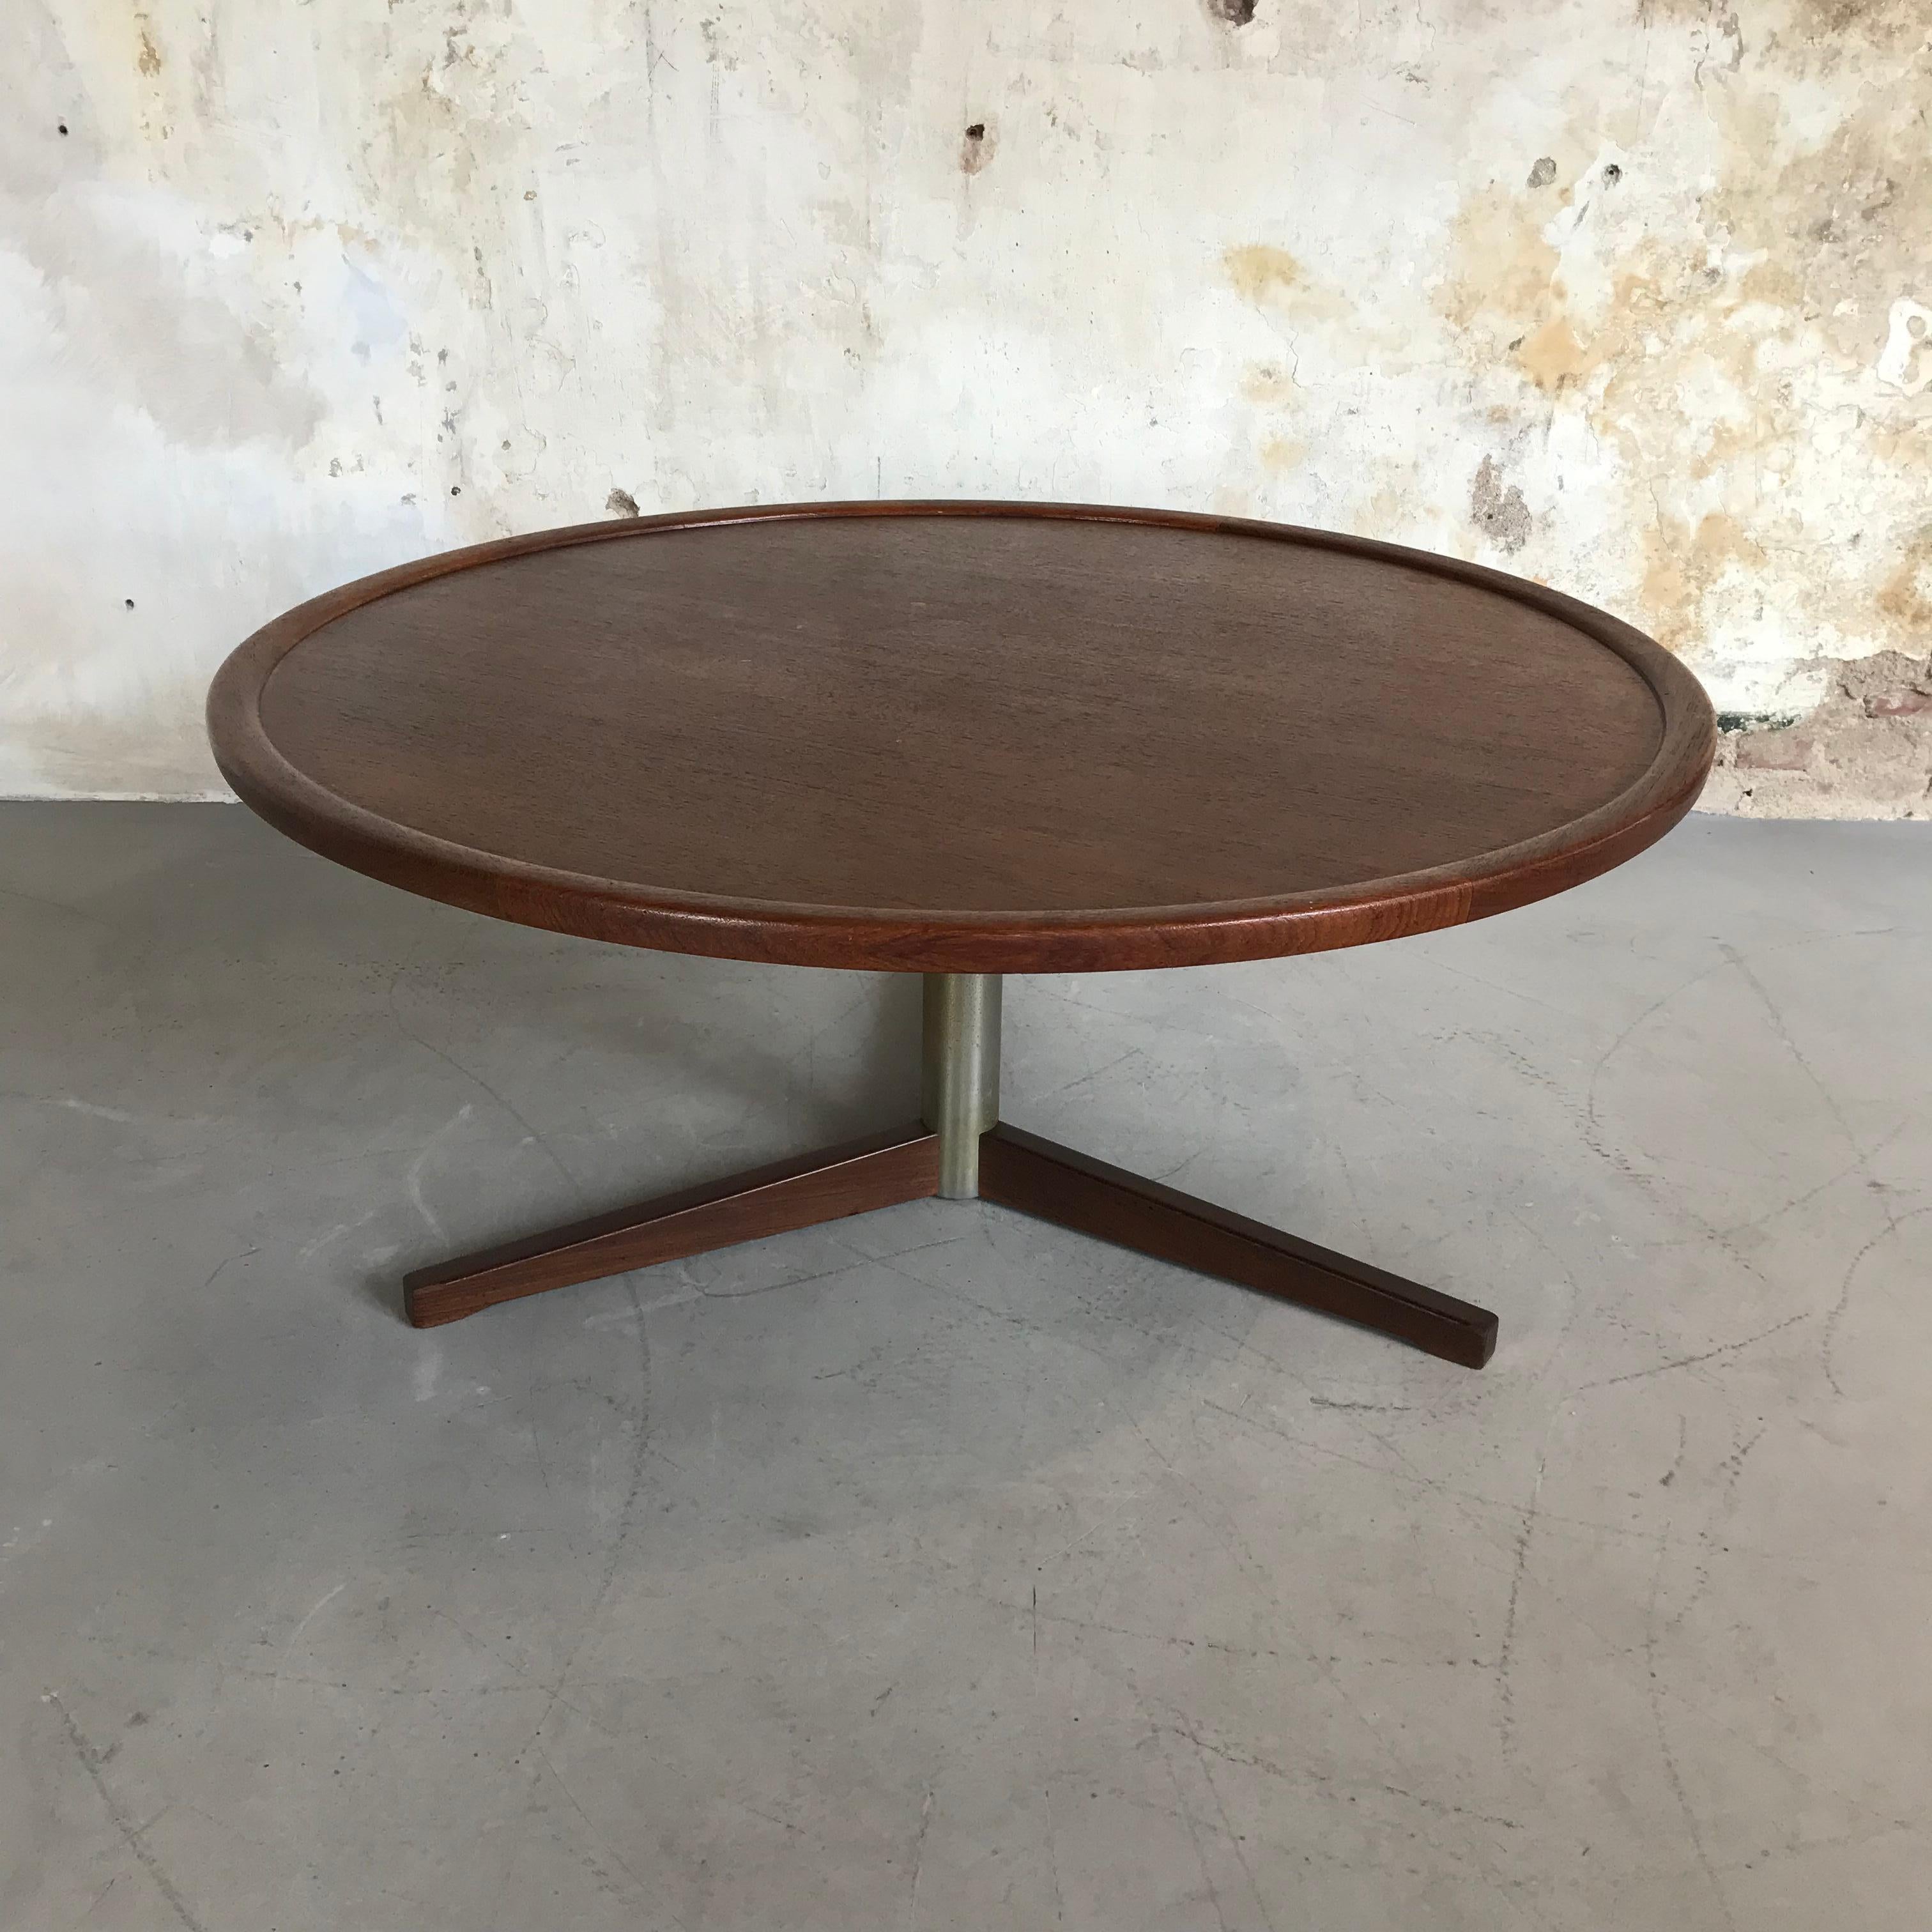 Beautiful teak coffee table designed by Martin Visser and produced by ‘t Spectrum, the Netherlands. This coffee table has a beautiful inlaid teak veneer top with a slightly raised edge. The top is resting on a solid metal base with three teak